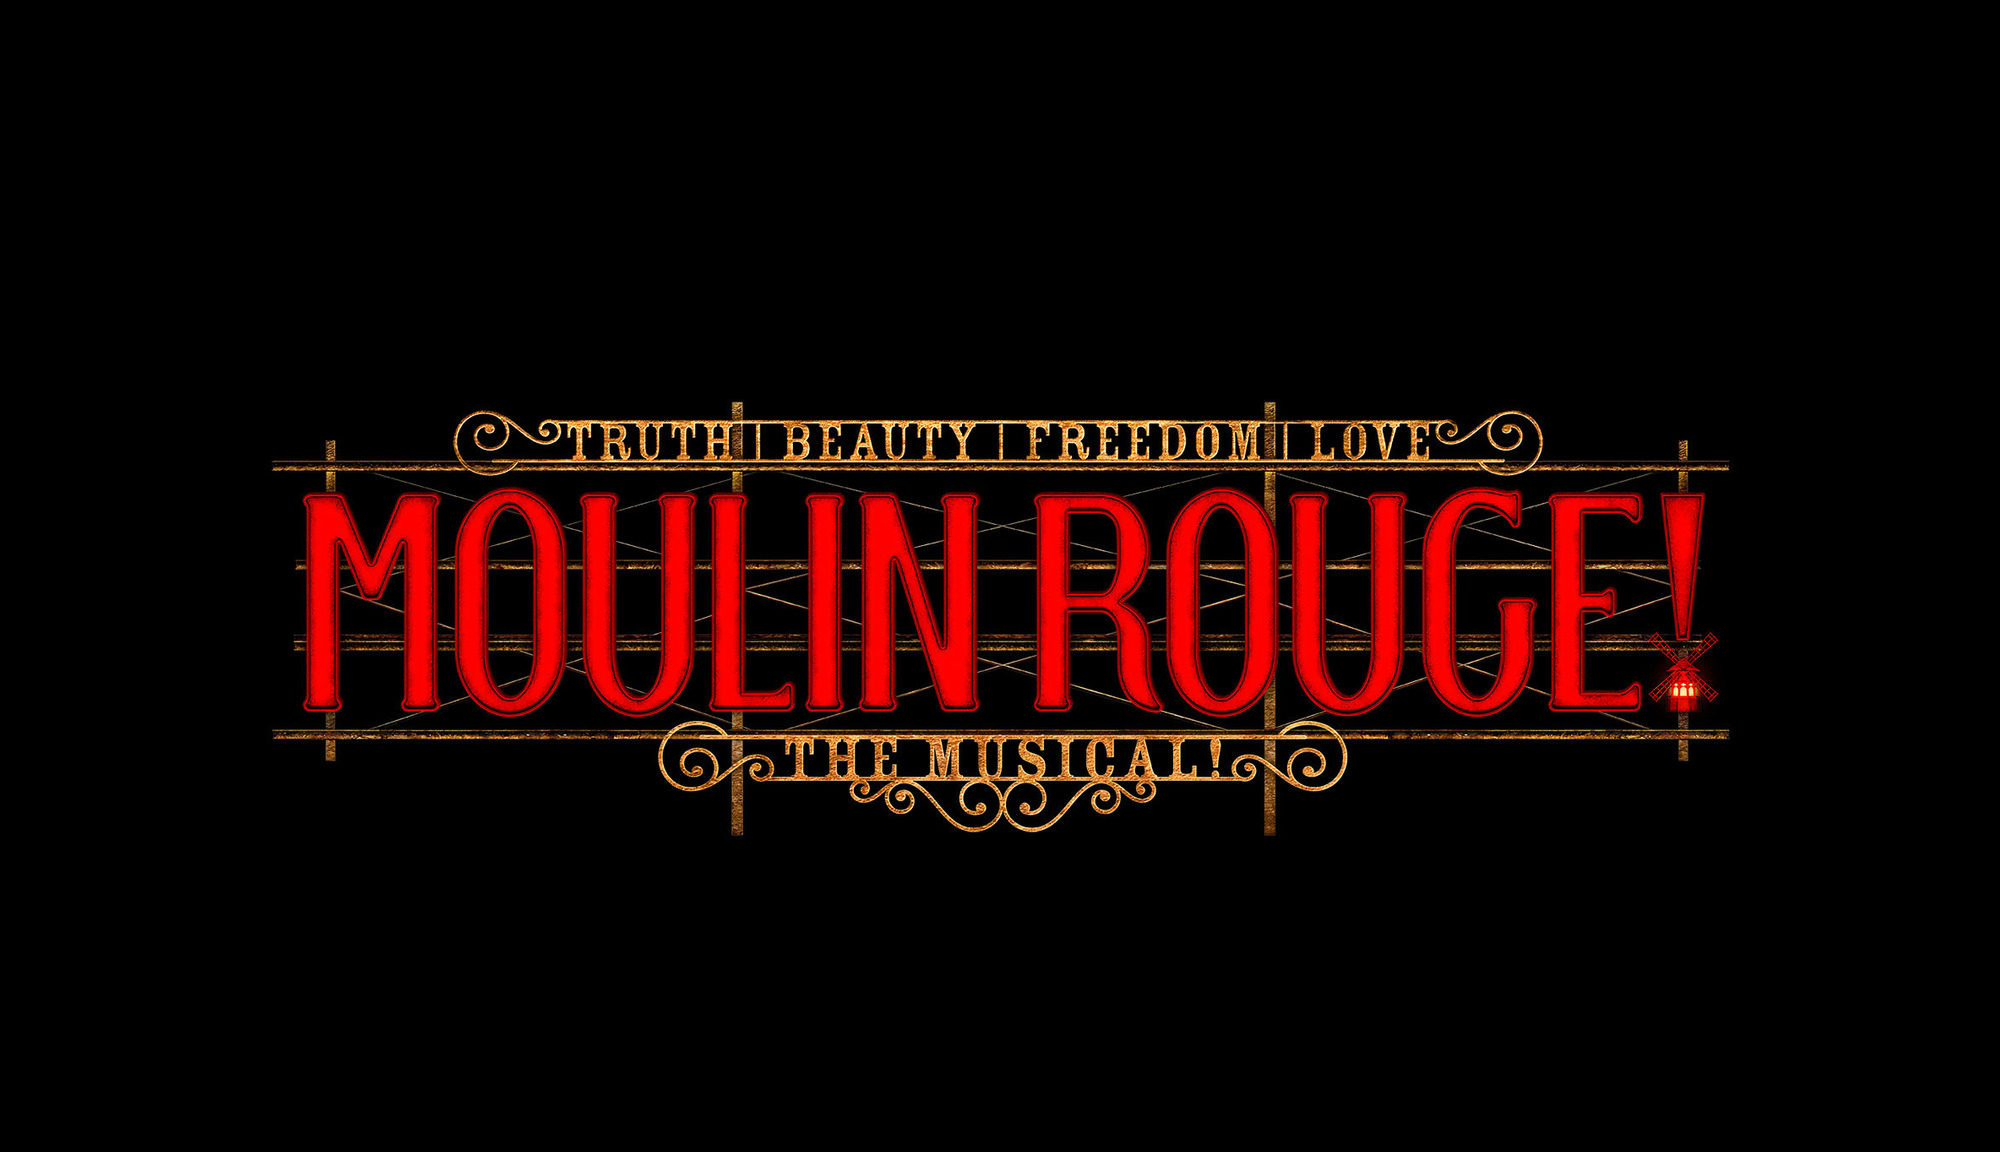 Moulin Rouge! The Musical (NY)